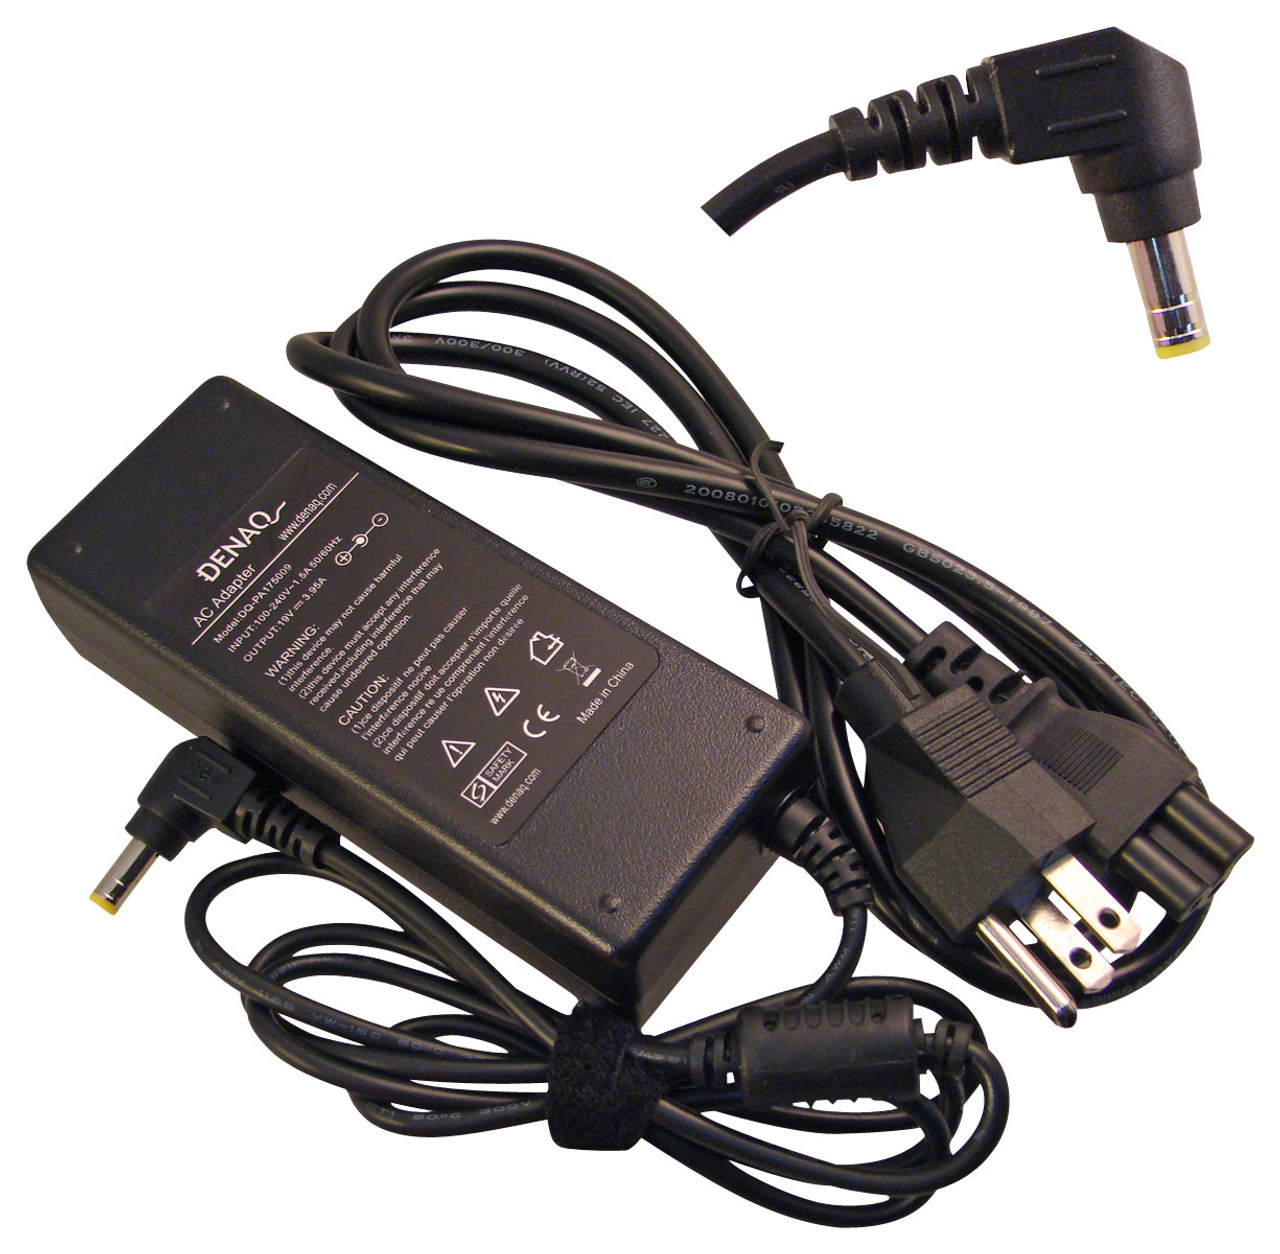 DENAQ - AC Power Adapter and Charger for Select Toshiba Satellite Laptops - Black